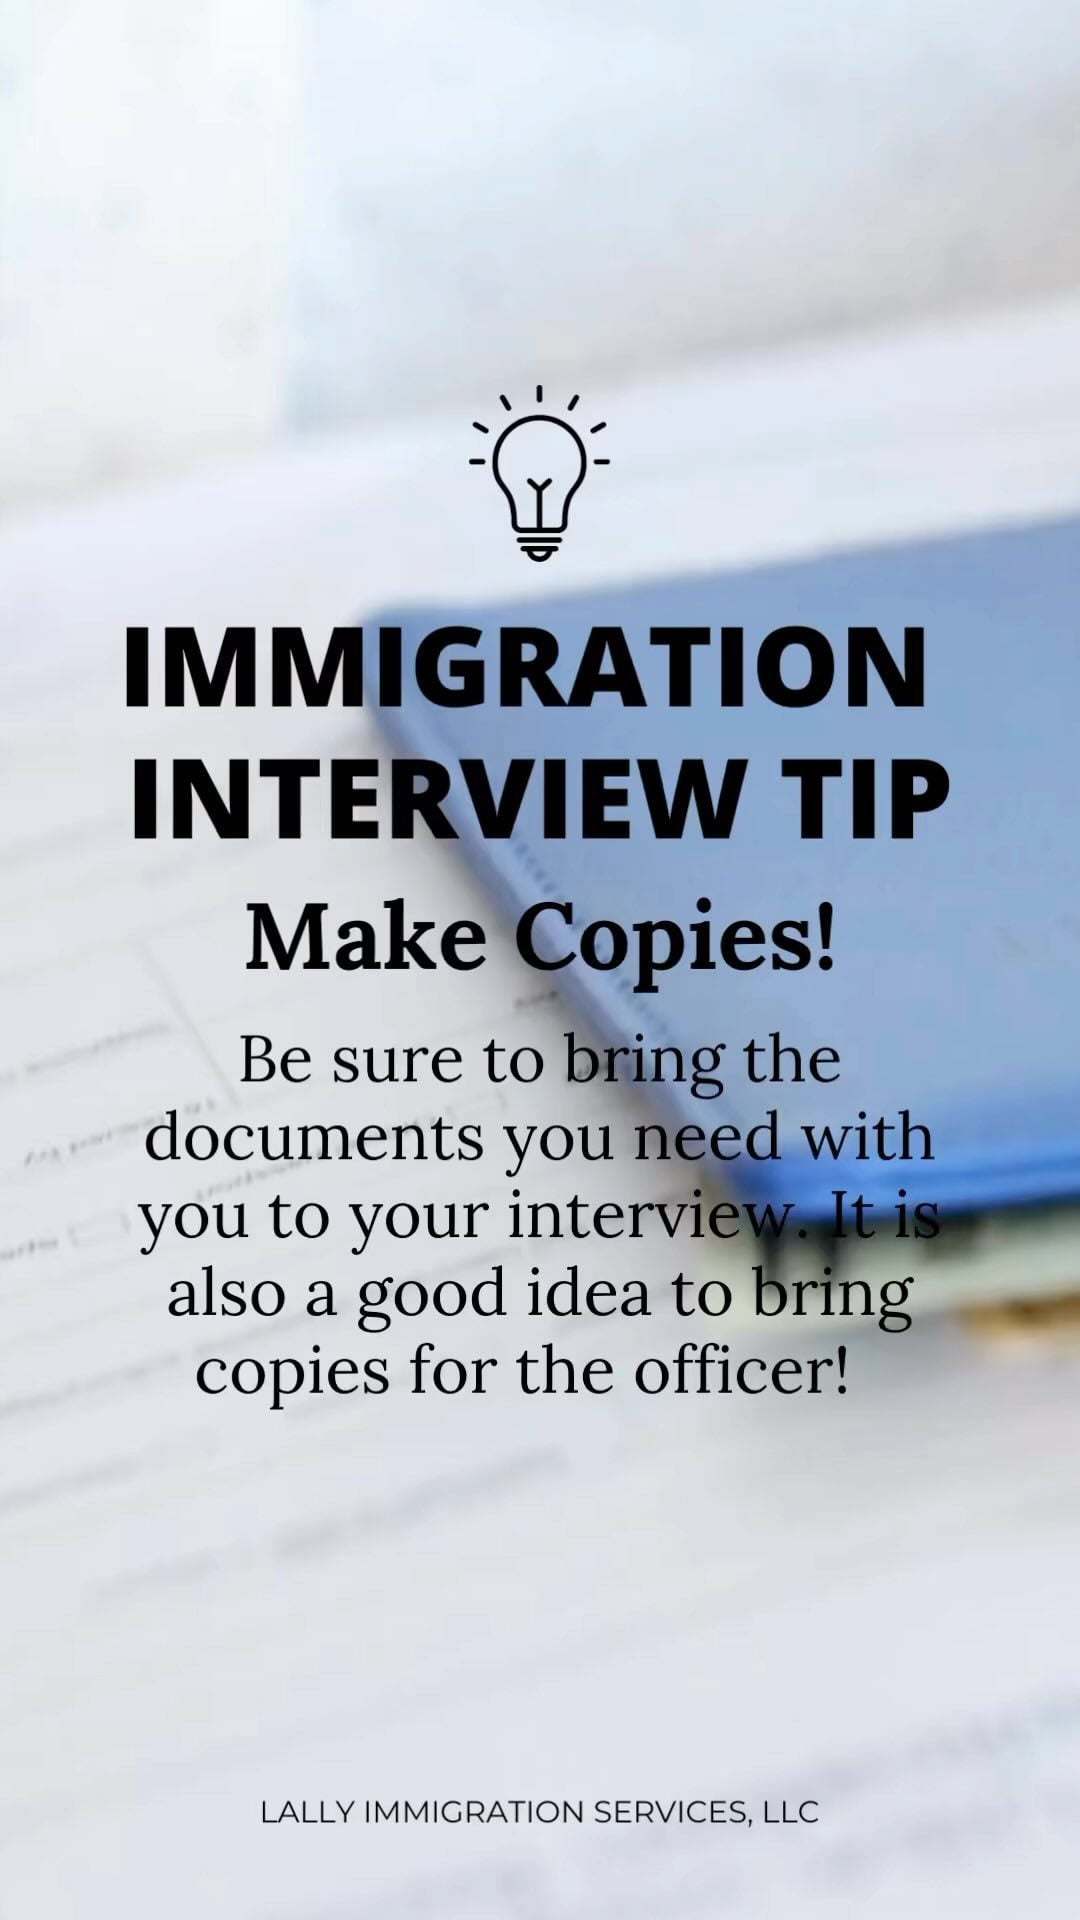 Immigration Interview Tip!